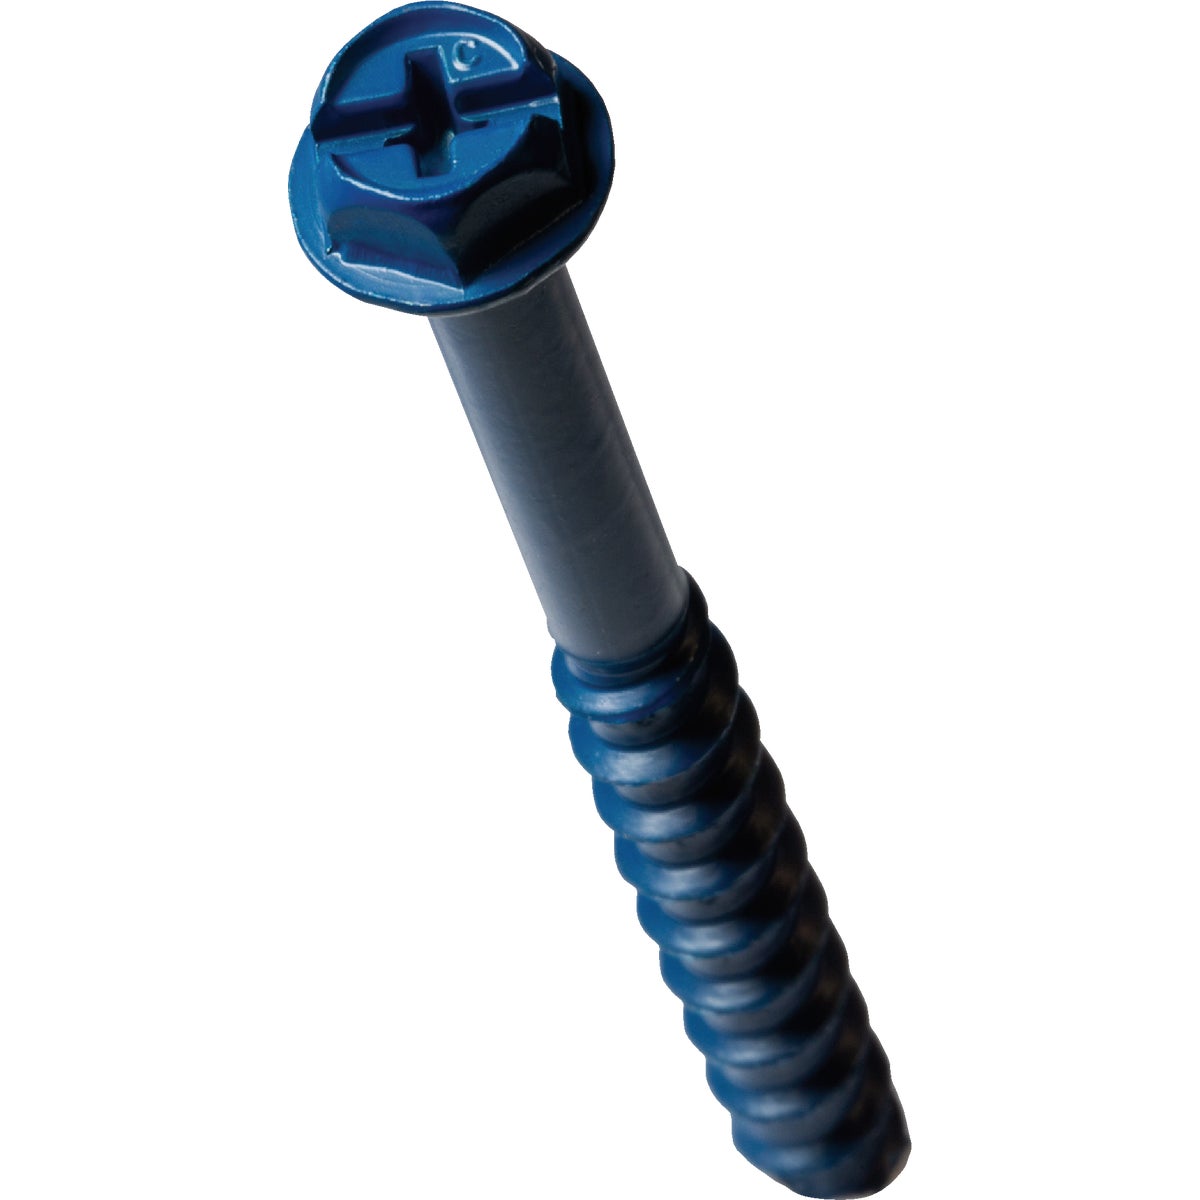 Simpson Strong-Tie Titen Turbo 1/4 in. x 2-3/4 in. Hex-Head Concrete and Masonry Screw, Blue (75-Qty)